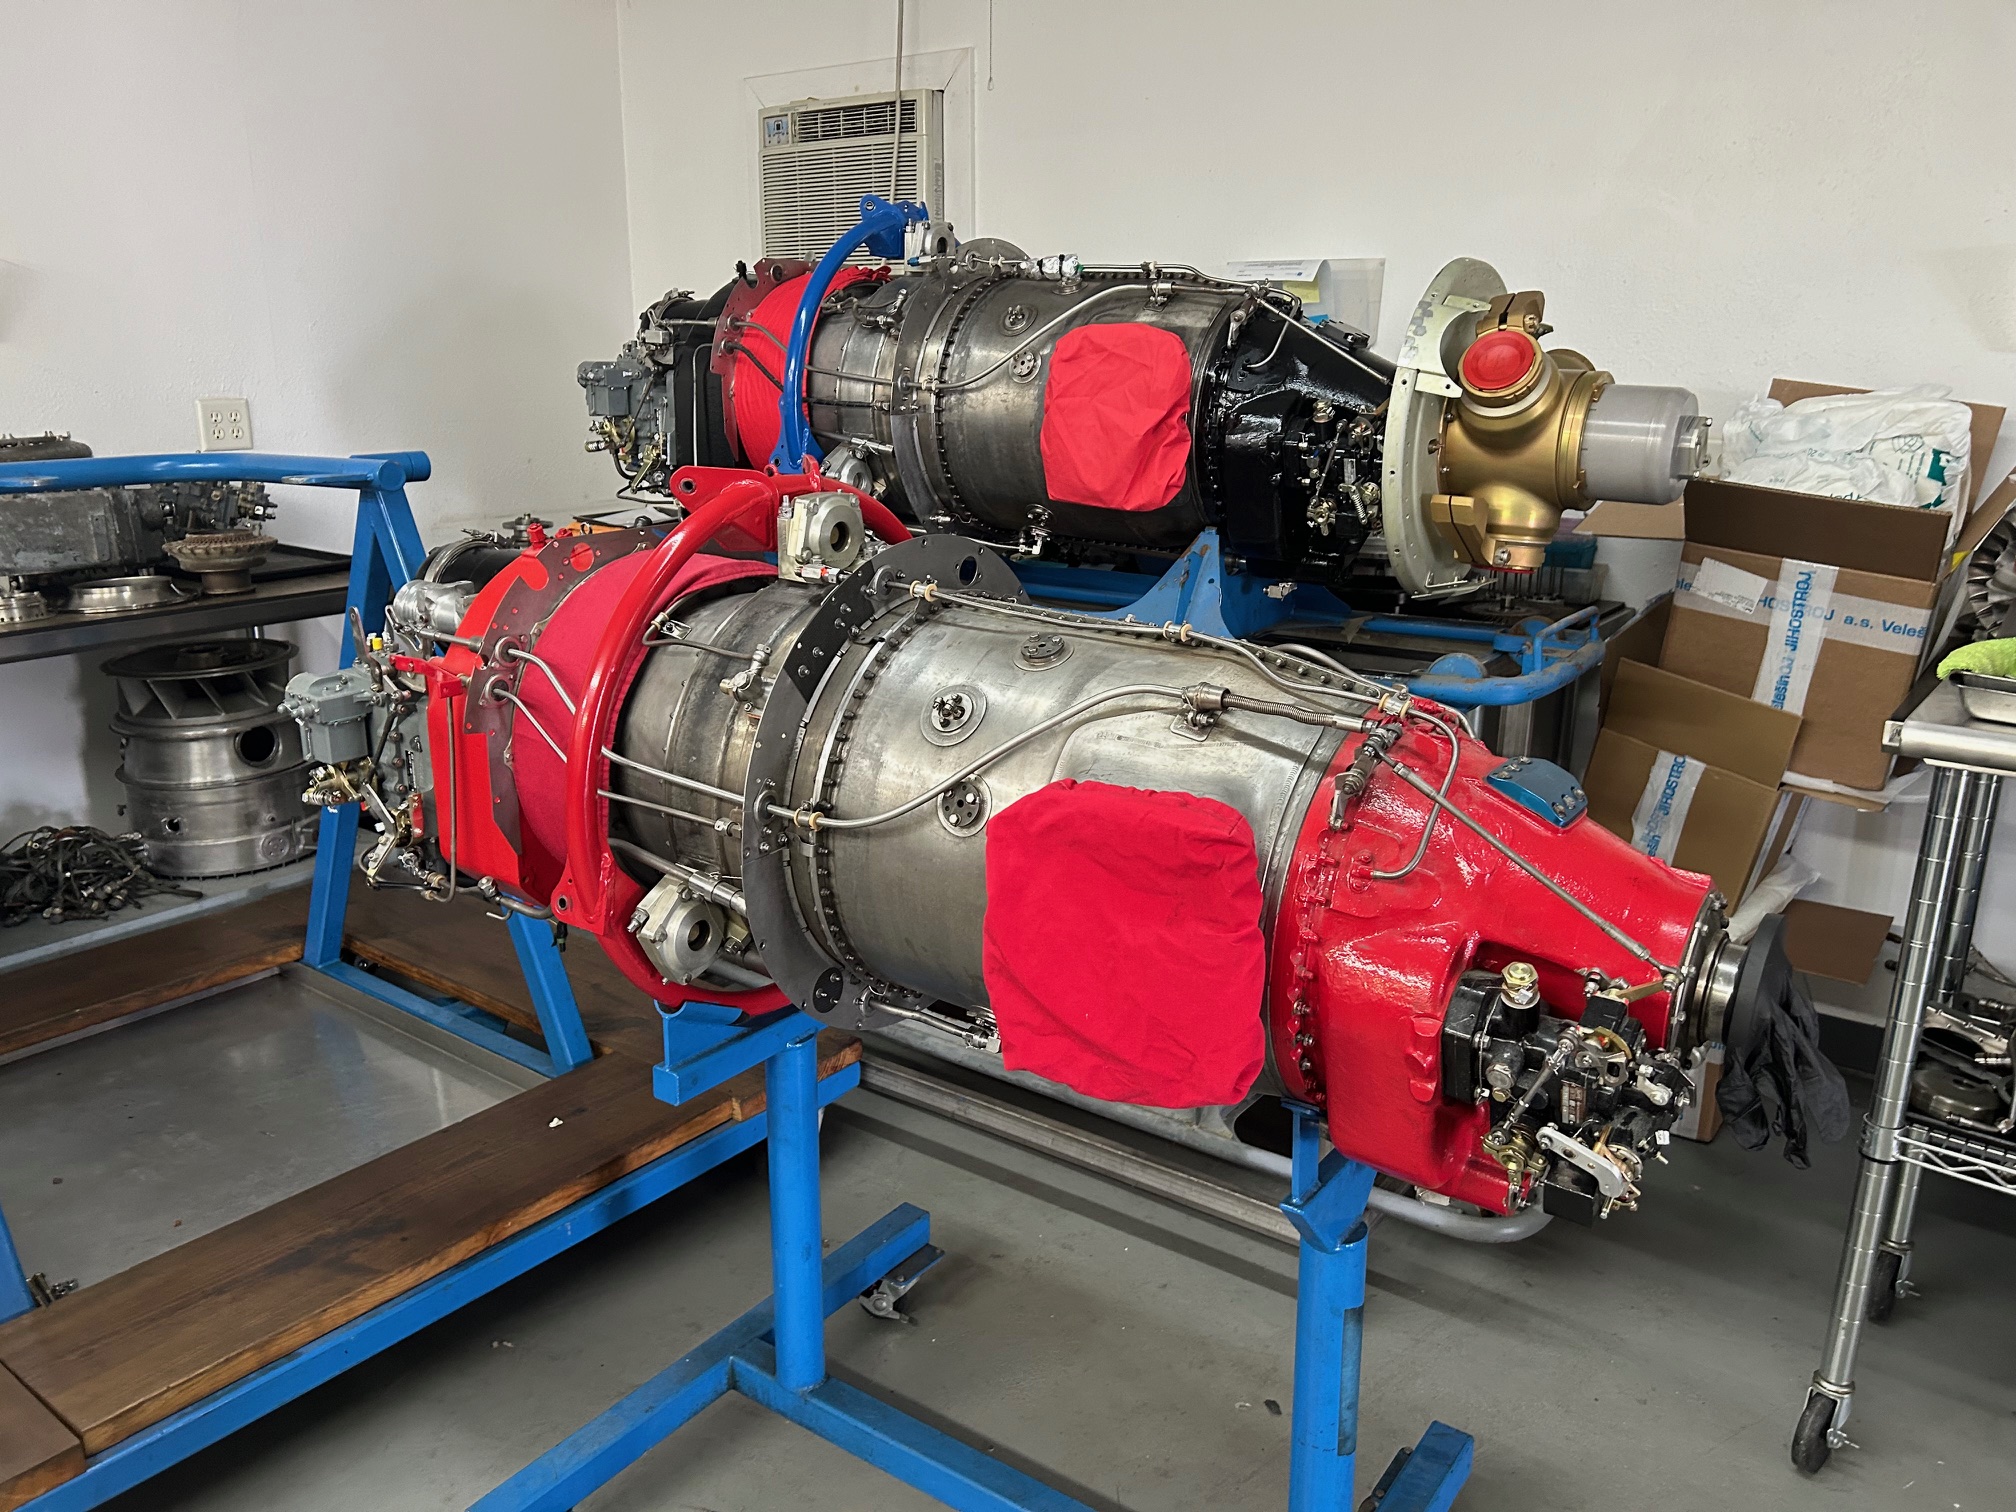 Joe Trepicone's engine ready to bring back to Michigan and be flying SOON!